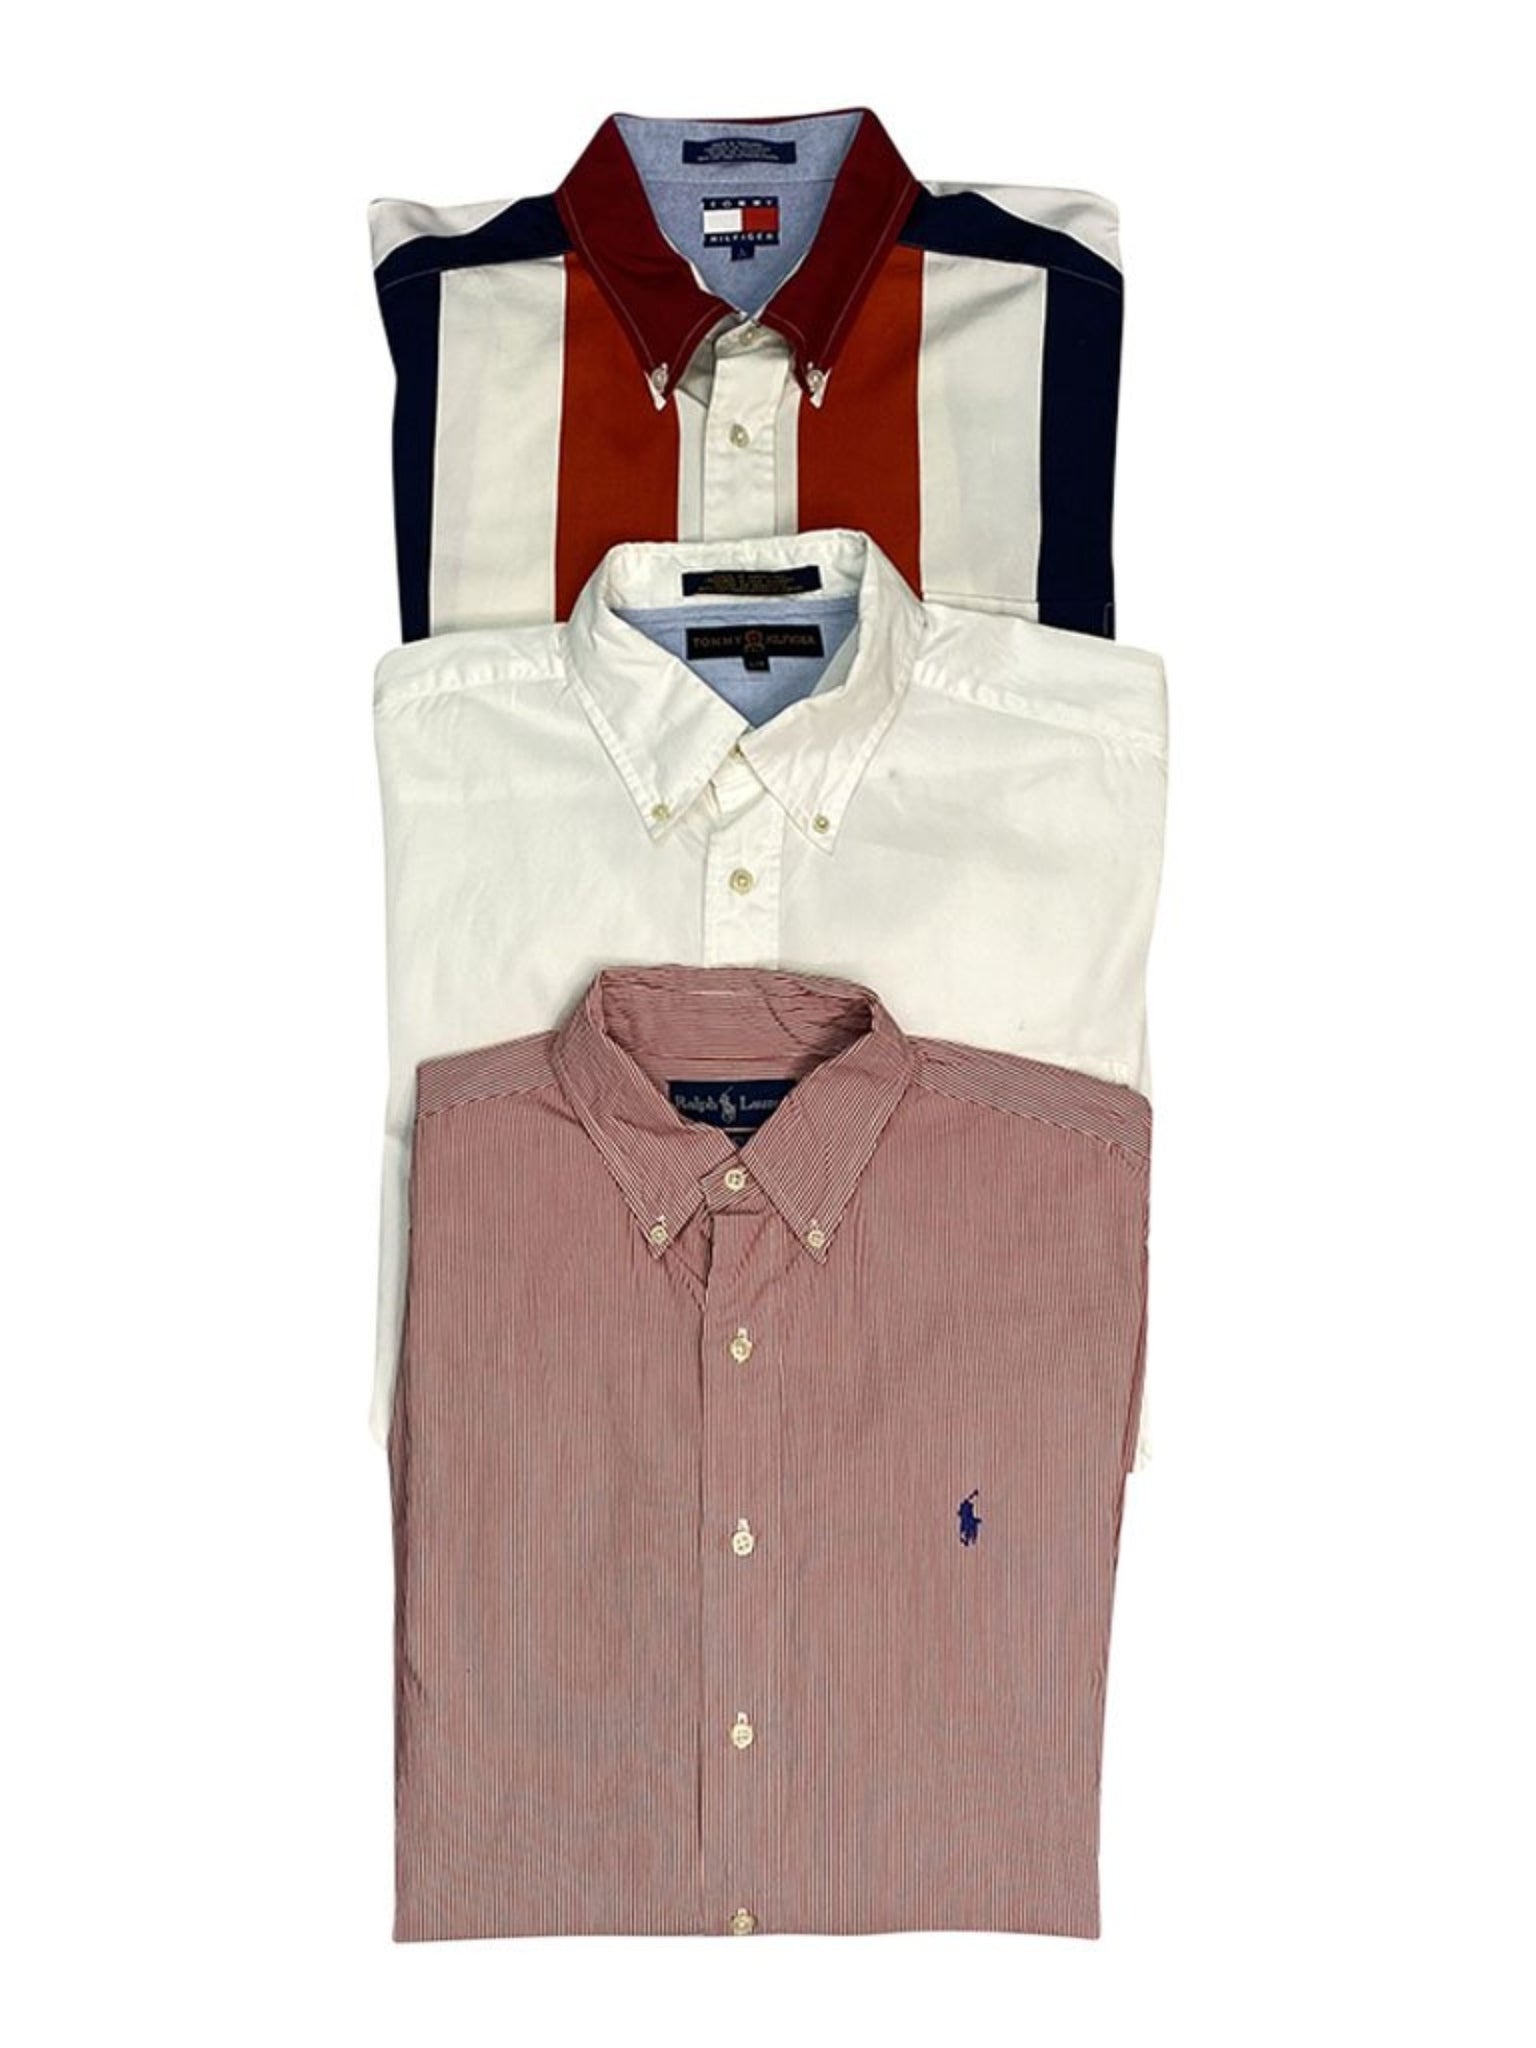 Vintage Ralph Lauren and Tommy Hilfiger Shirts Bundle – American Recycled  Clothing Wholesale